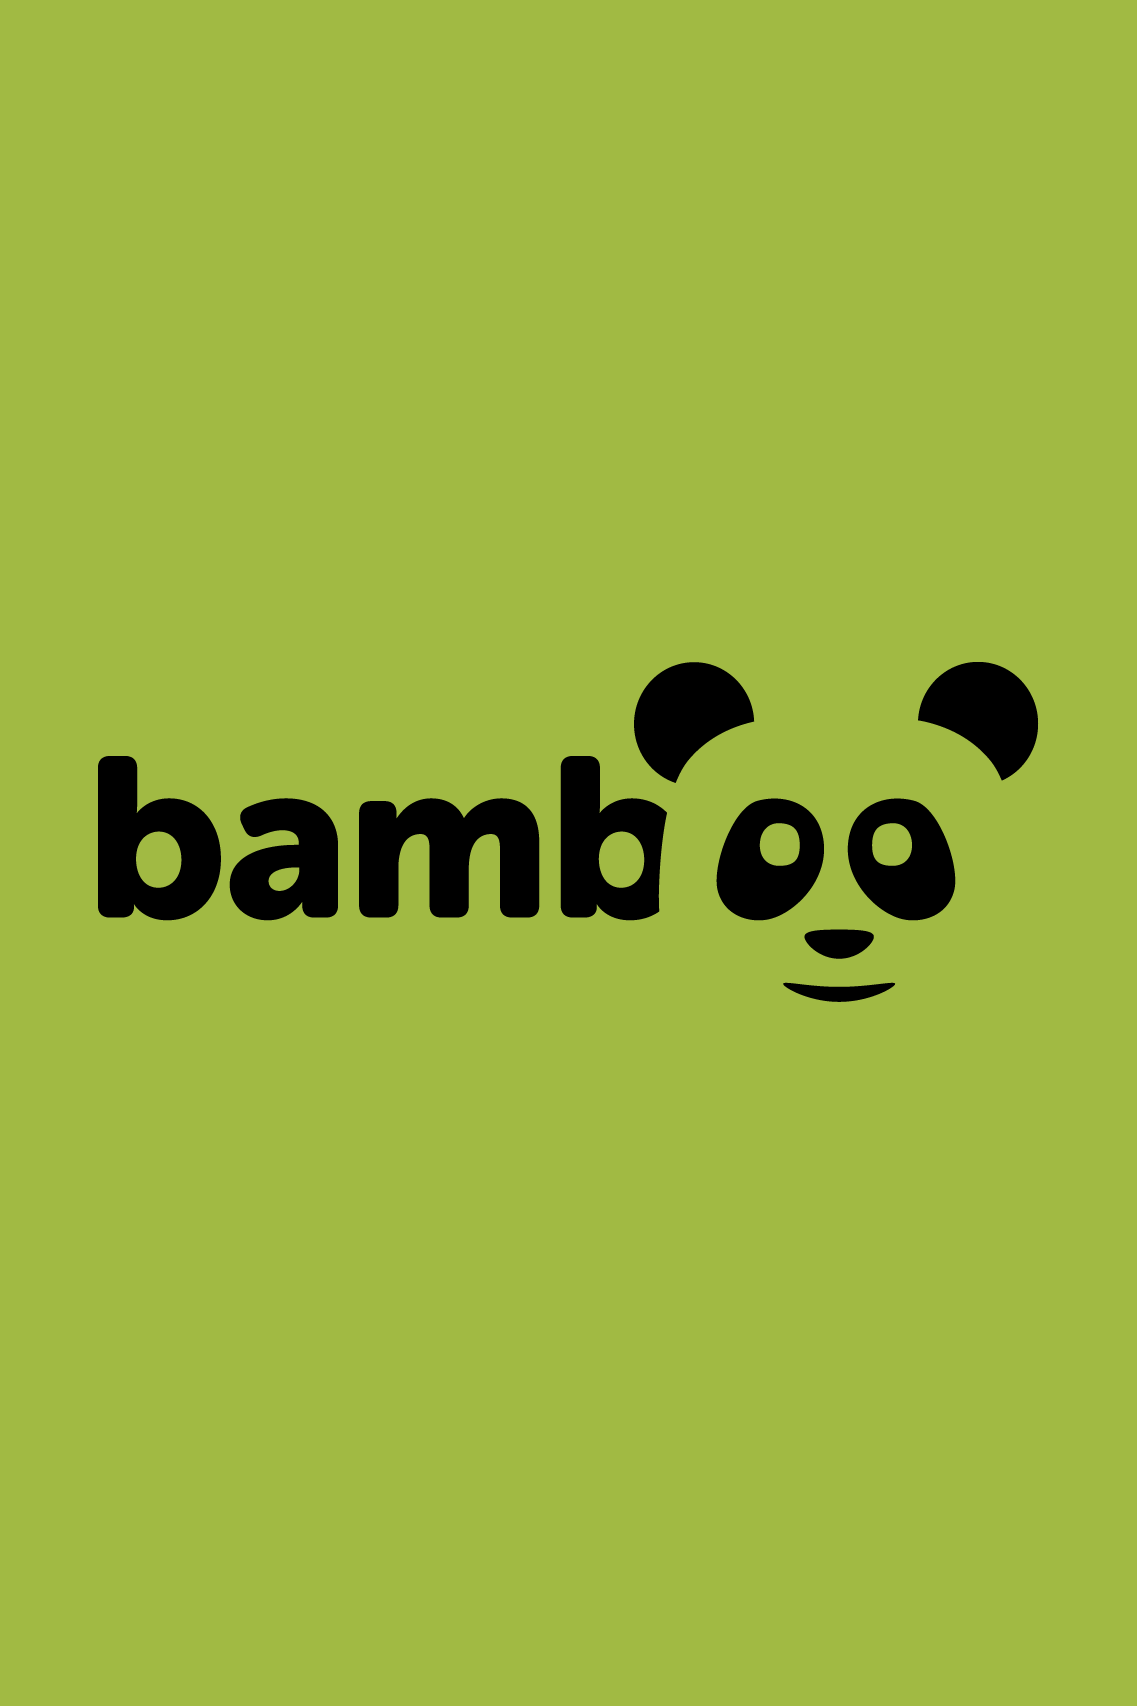 Daily logo challenge, day 3, Bamboo nonprofit company logo by Xavier Wendling